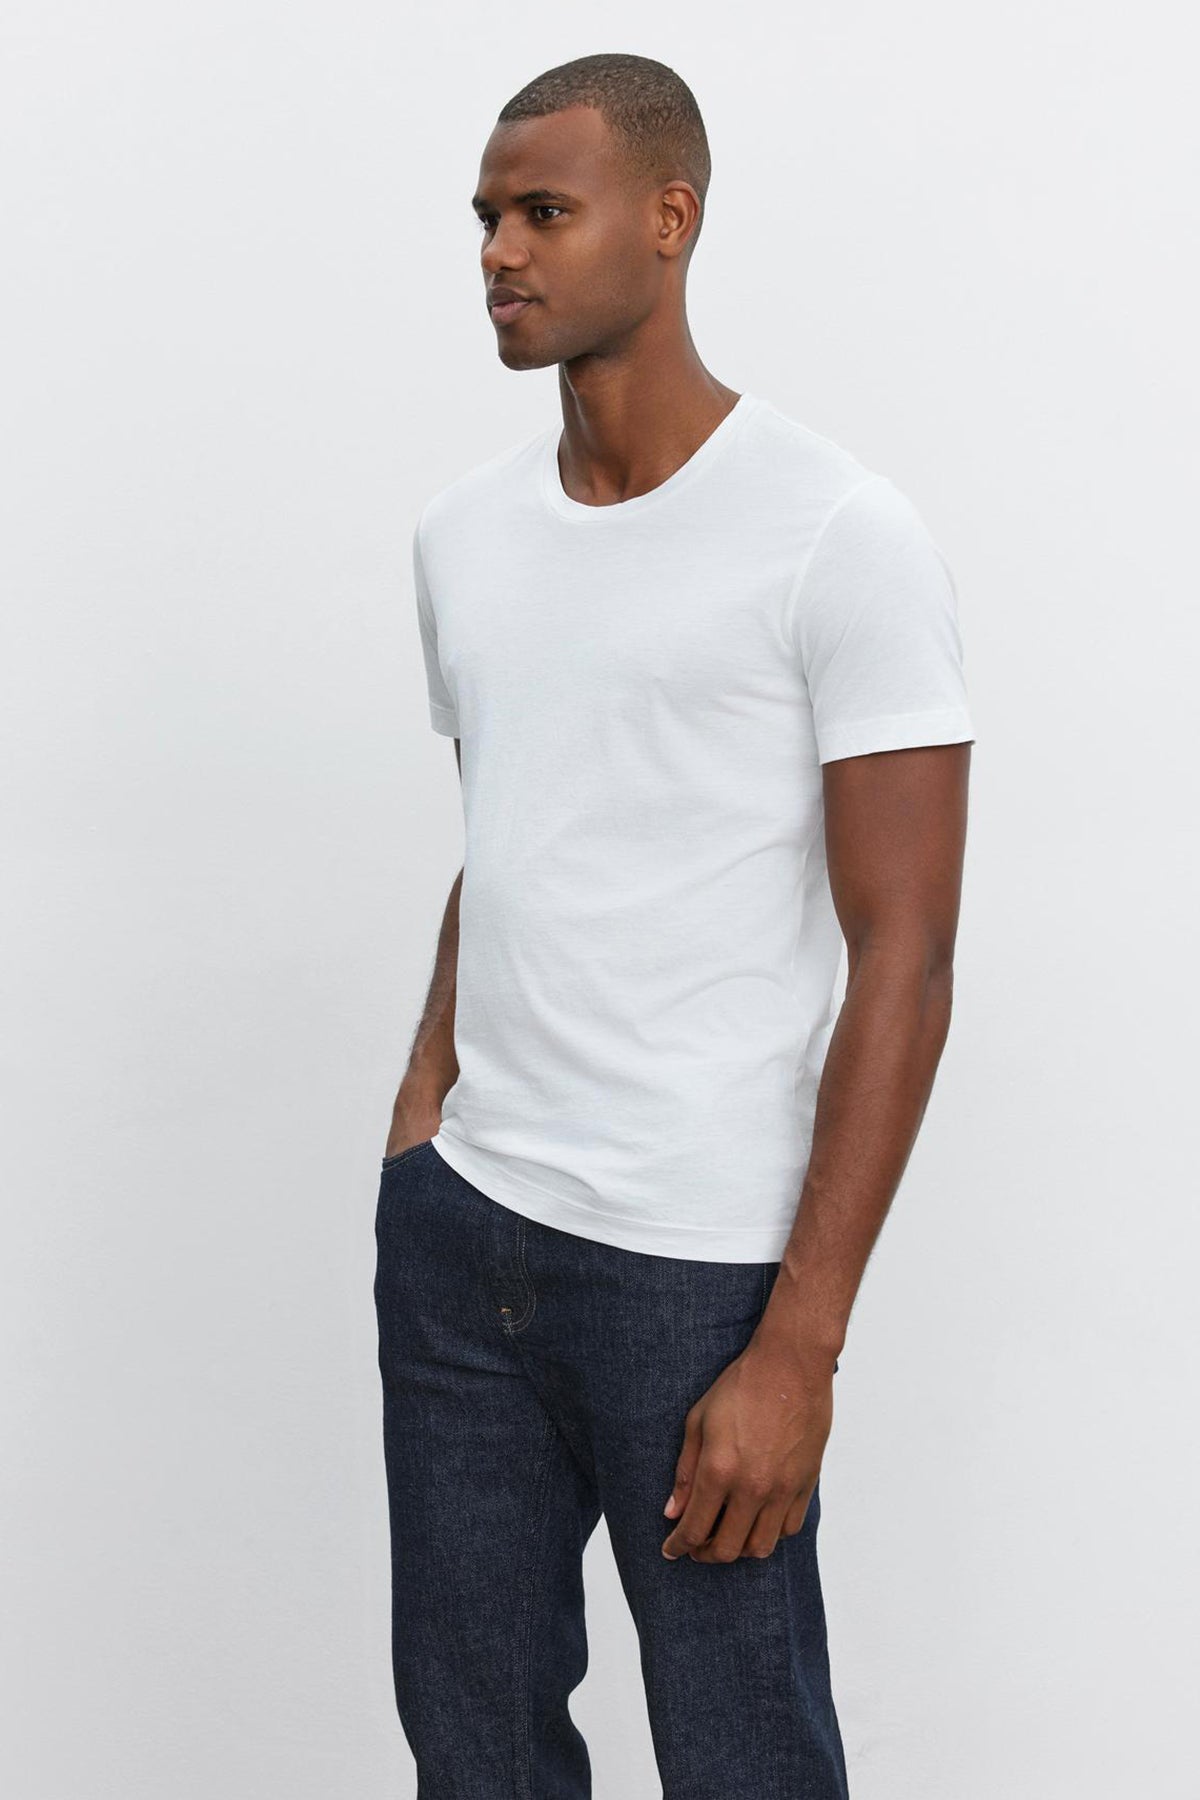 A man wearing a Velvet by Graham & Spencer HOWARD WHISPER CLASSIC CREW NECK TEE and jeans.-35867473215681